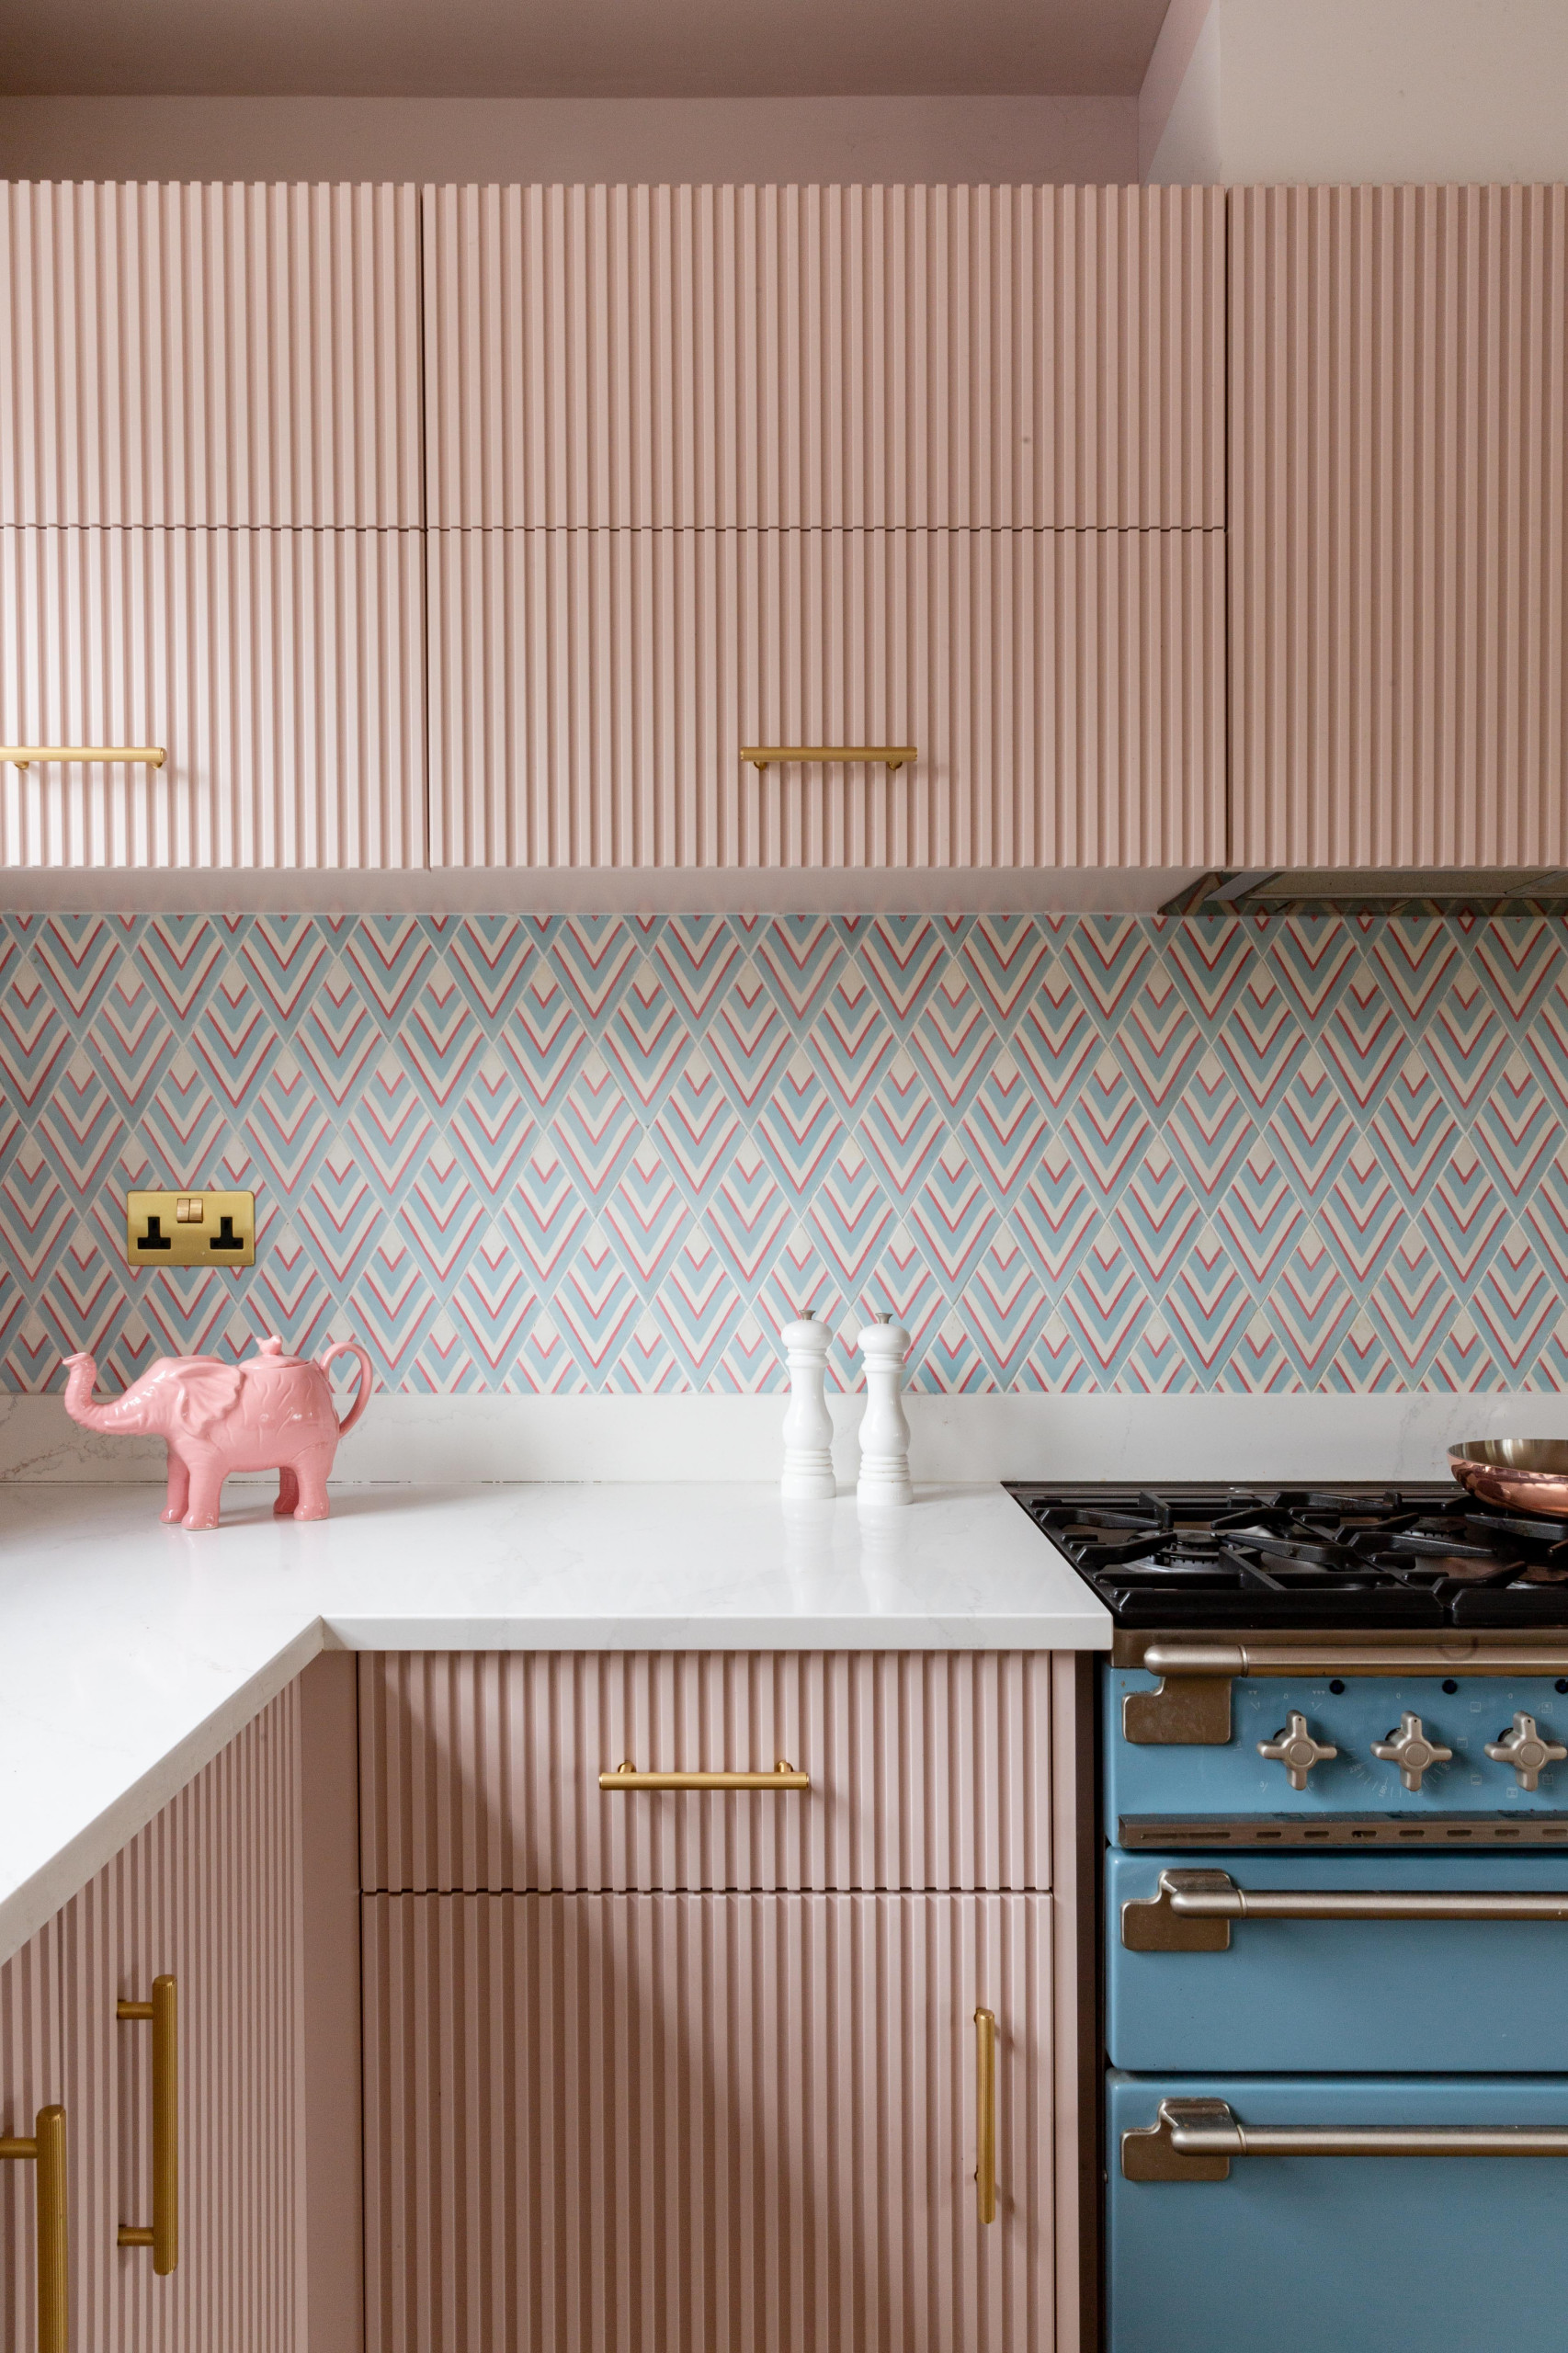 Down and Out Chic: Decor: Pastel Kitchen Accessories